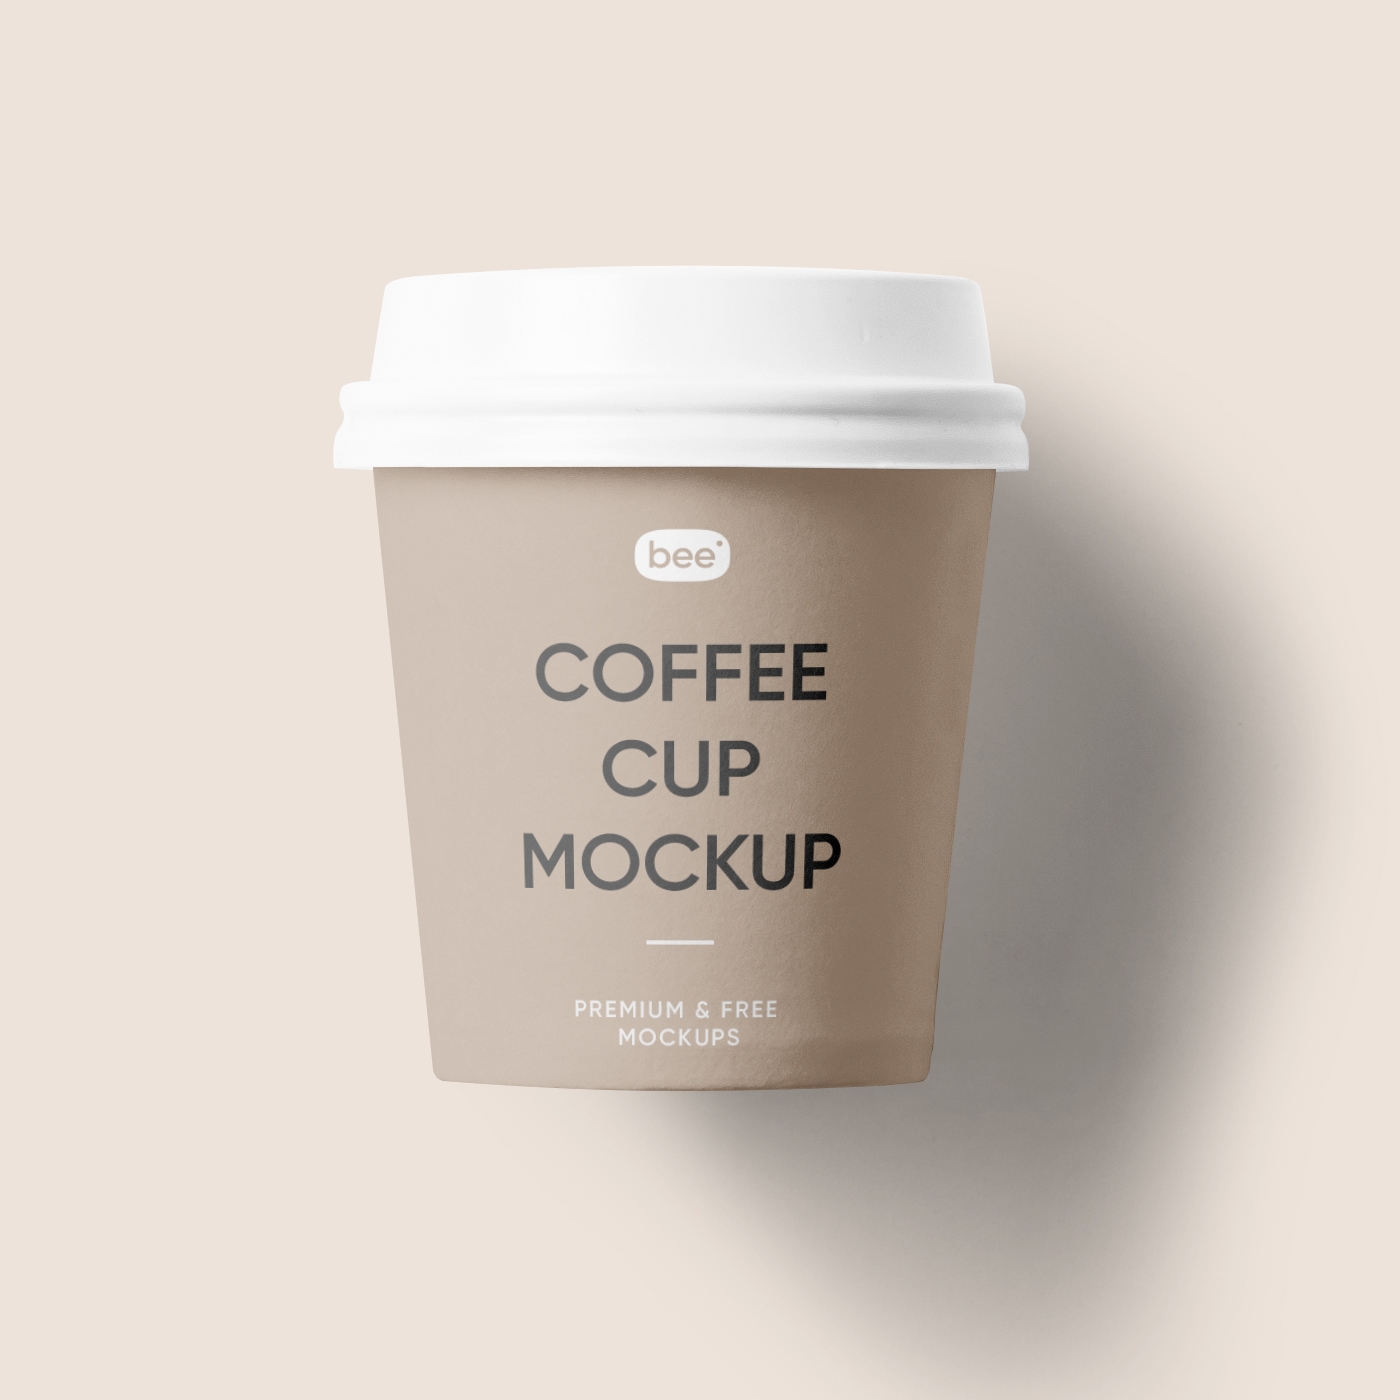 https://resourceboy.com/wp-content/uploads/2022/09/front-view-of-small-paper-coffee-cup-mockup-1.jpg